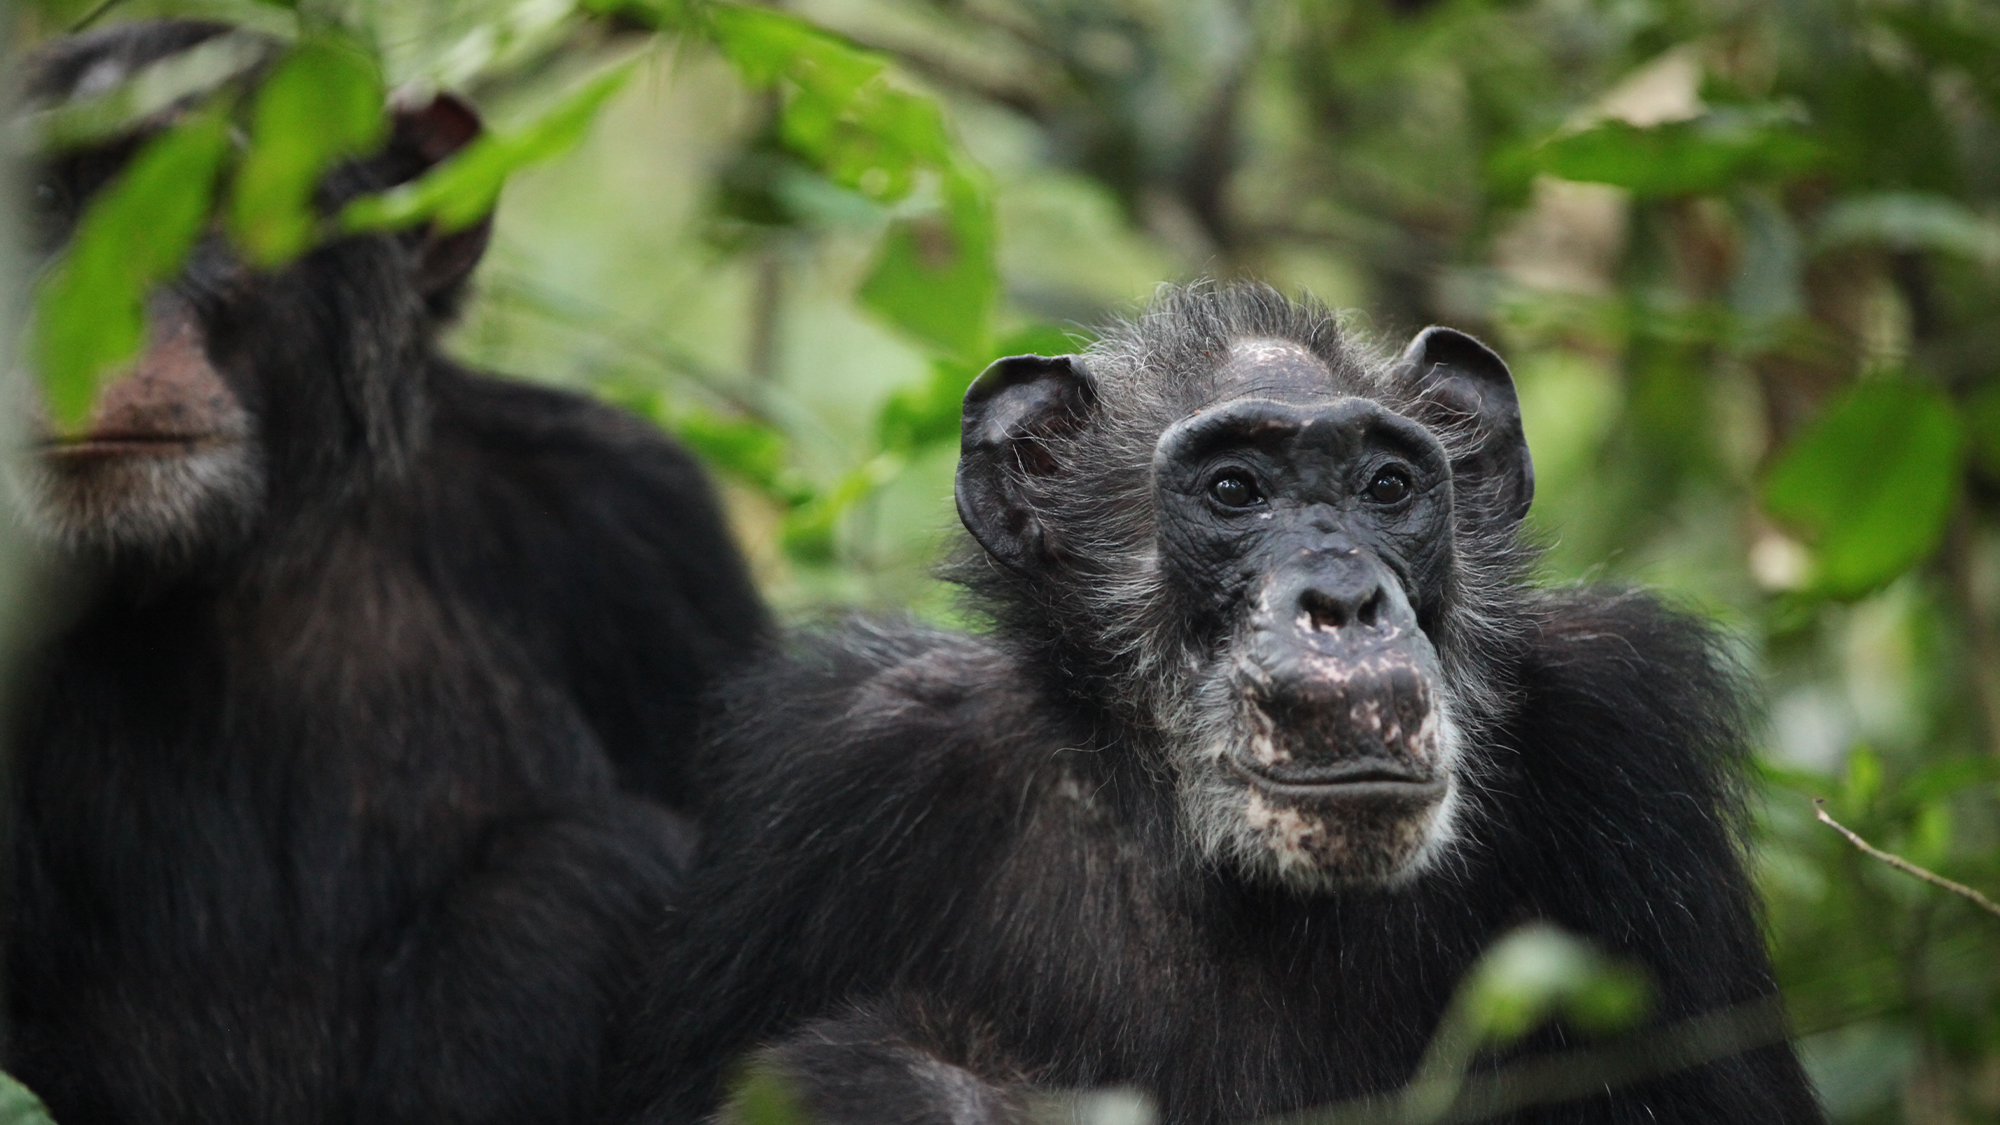 Ma Rainey, a post-reproductive female of the Ngogo community of chimpanzees in Kibale National Park, Uganda, and her adult son Wes. The two are sitting among trees in a forest.